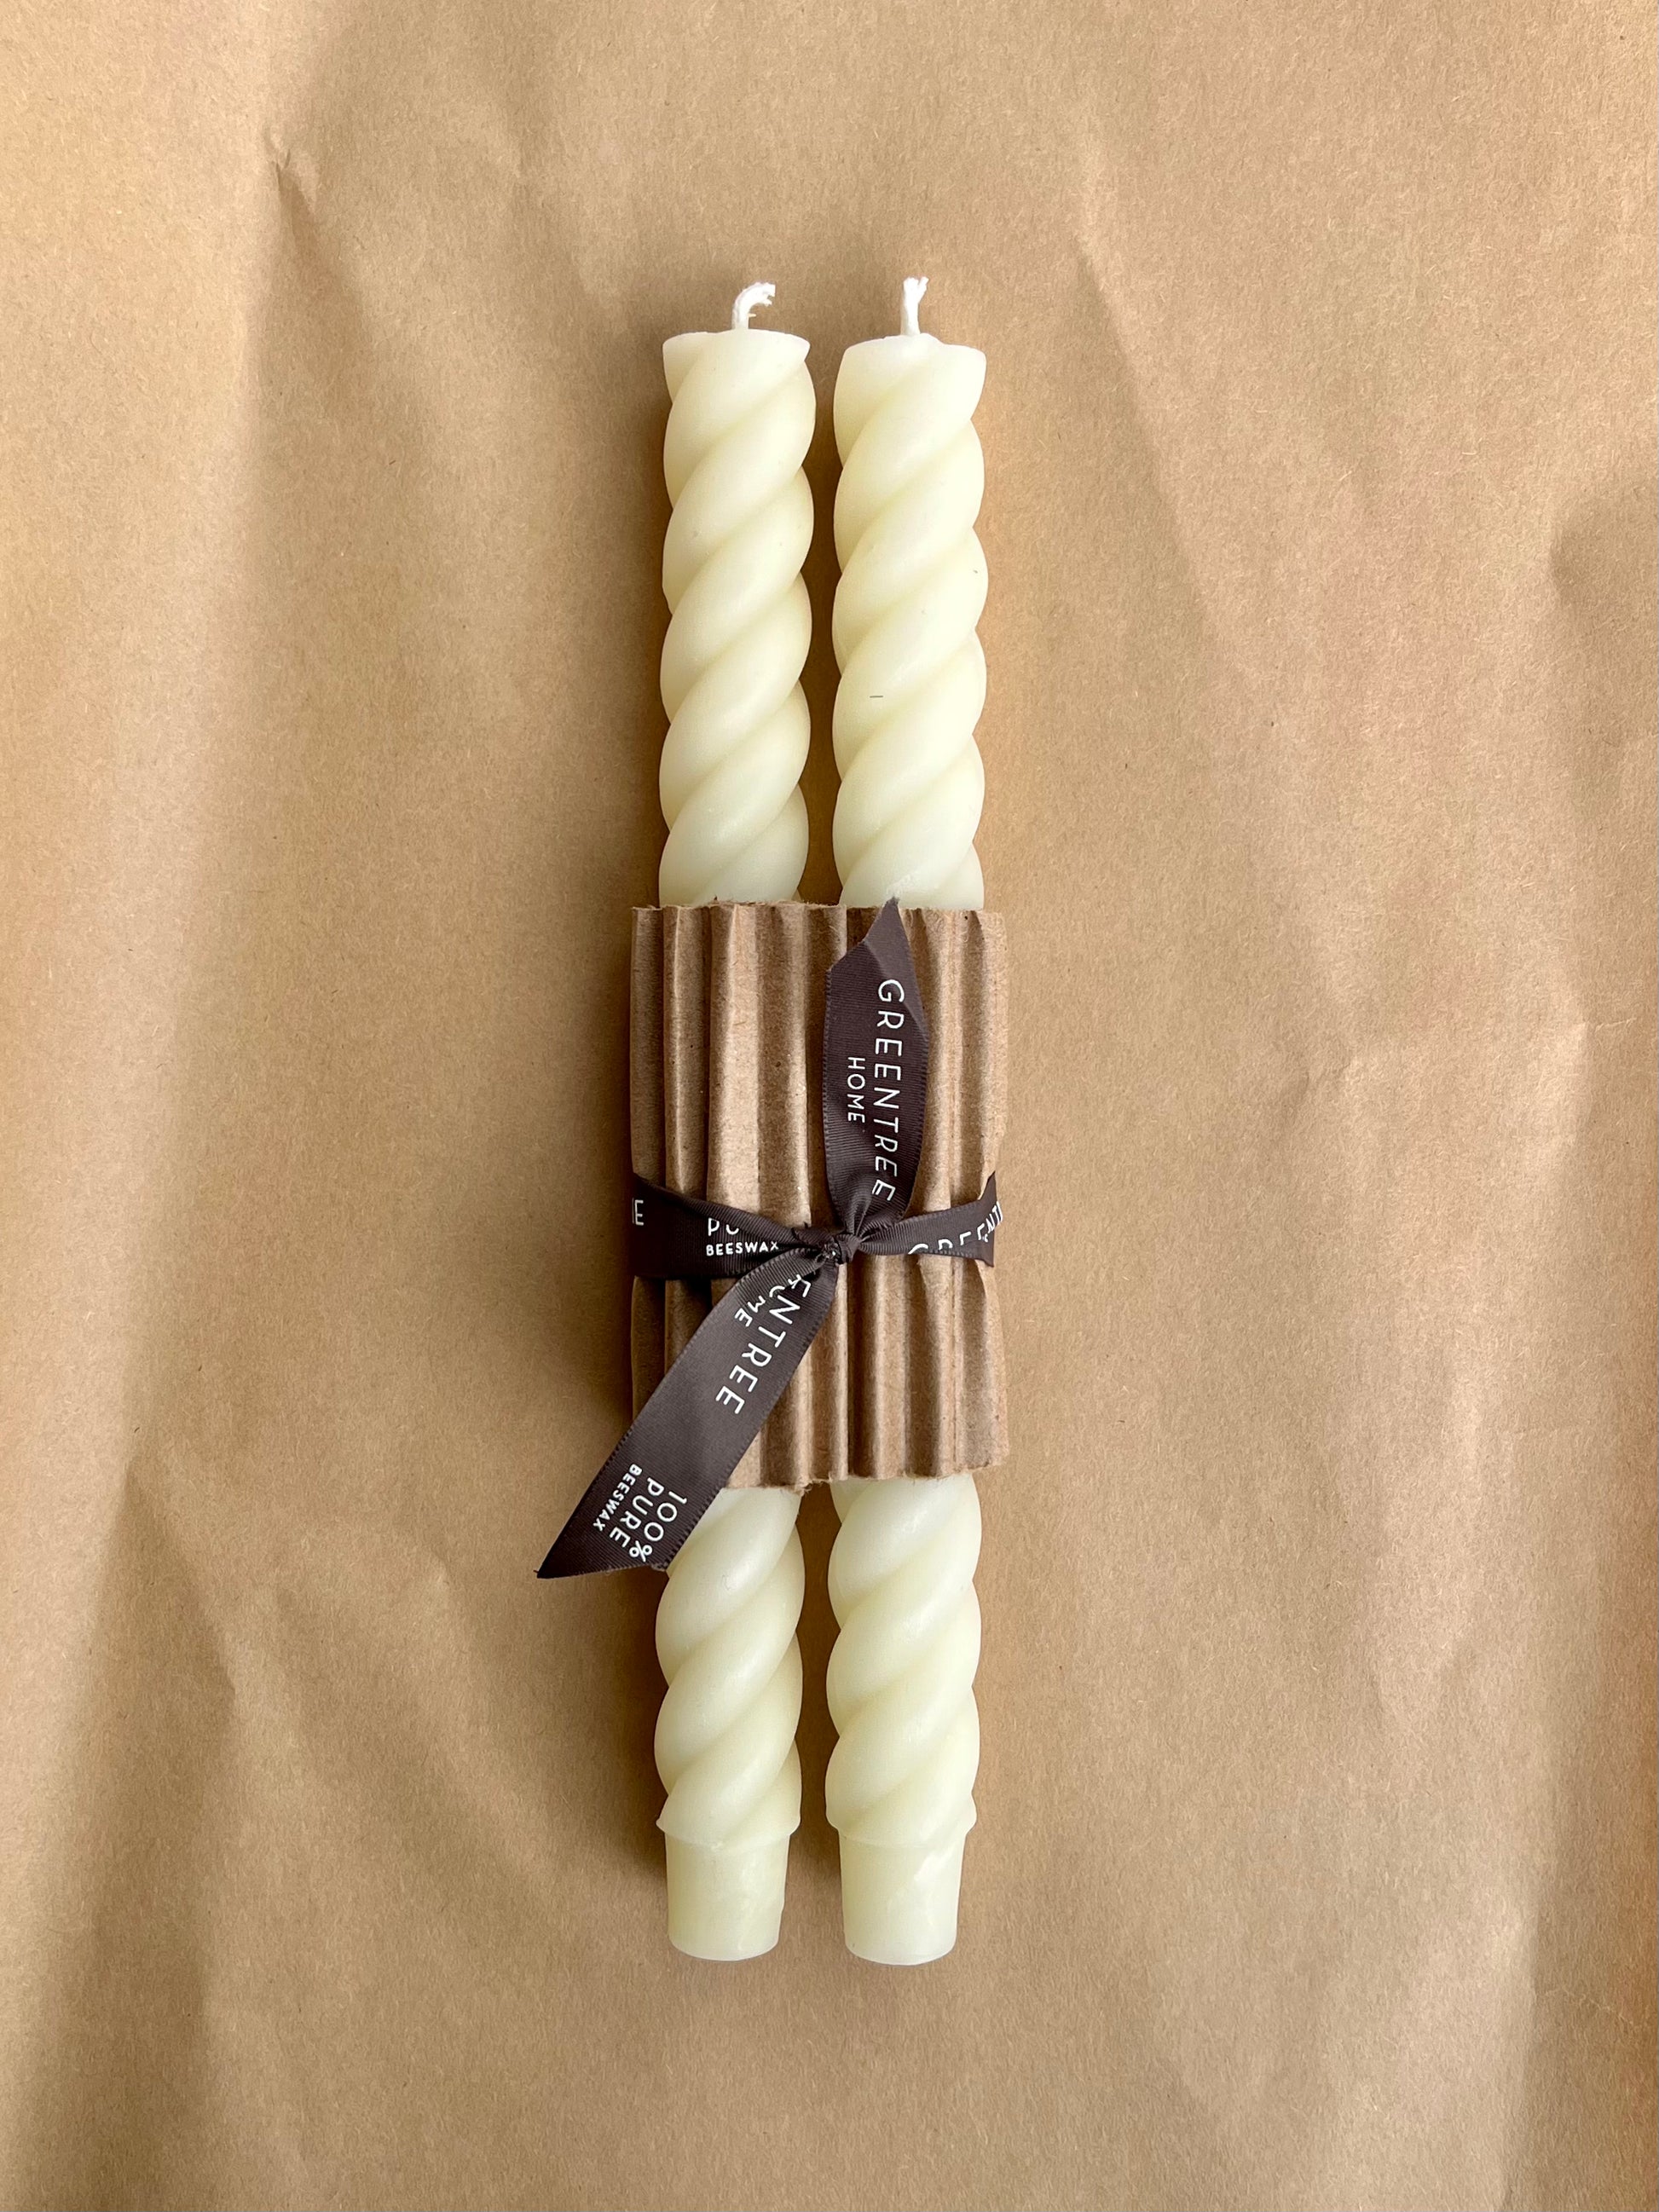 greentree home candle / An elegant and playful twist on the classic taper. Set of 2, 100% pure North American beeswax candles. Each candle is hand poured and individually finished in New York State. cream